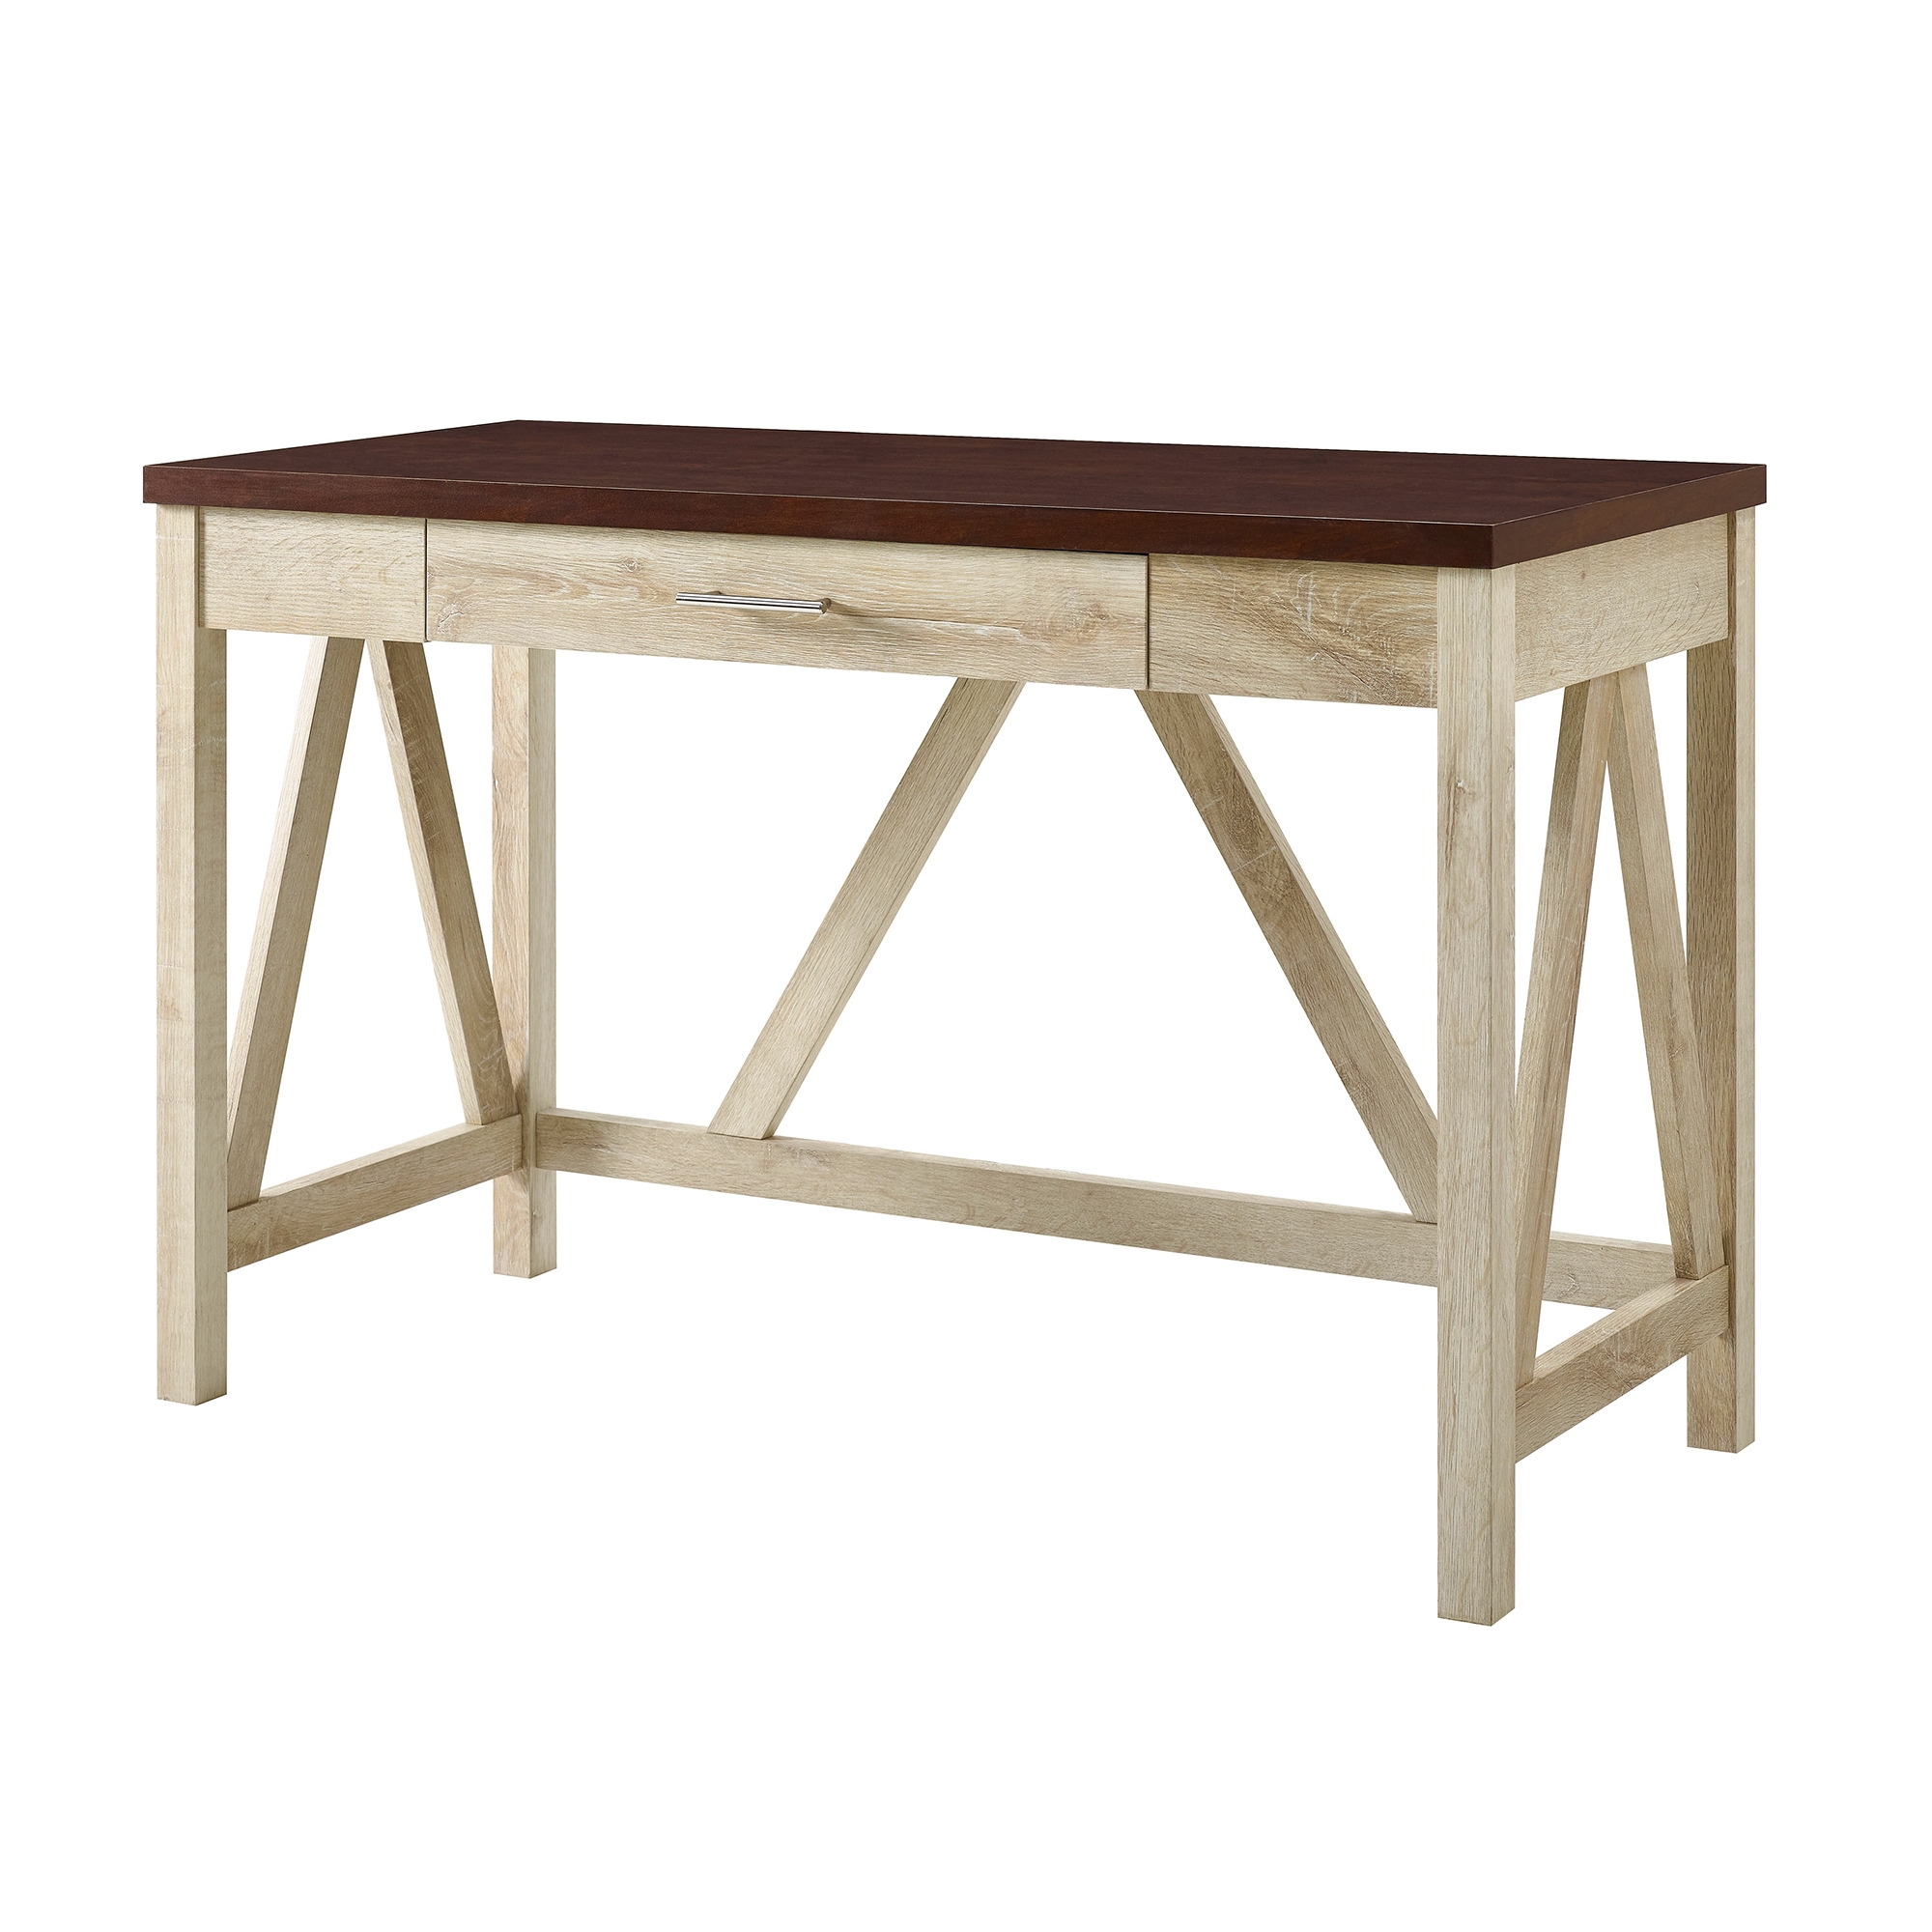 46" A Frame Modern Farmhouse Wood Computer Desk with Drawer - White Oak/Traditional Brown - Image 2